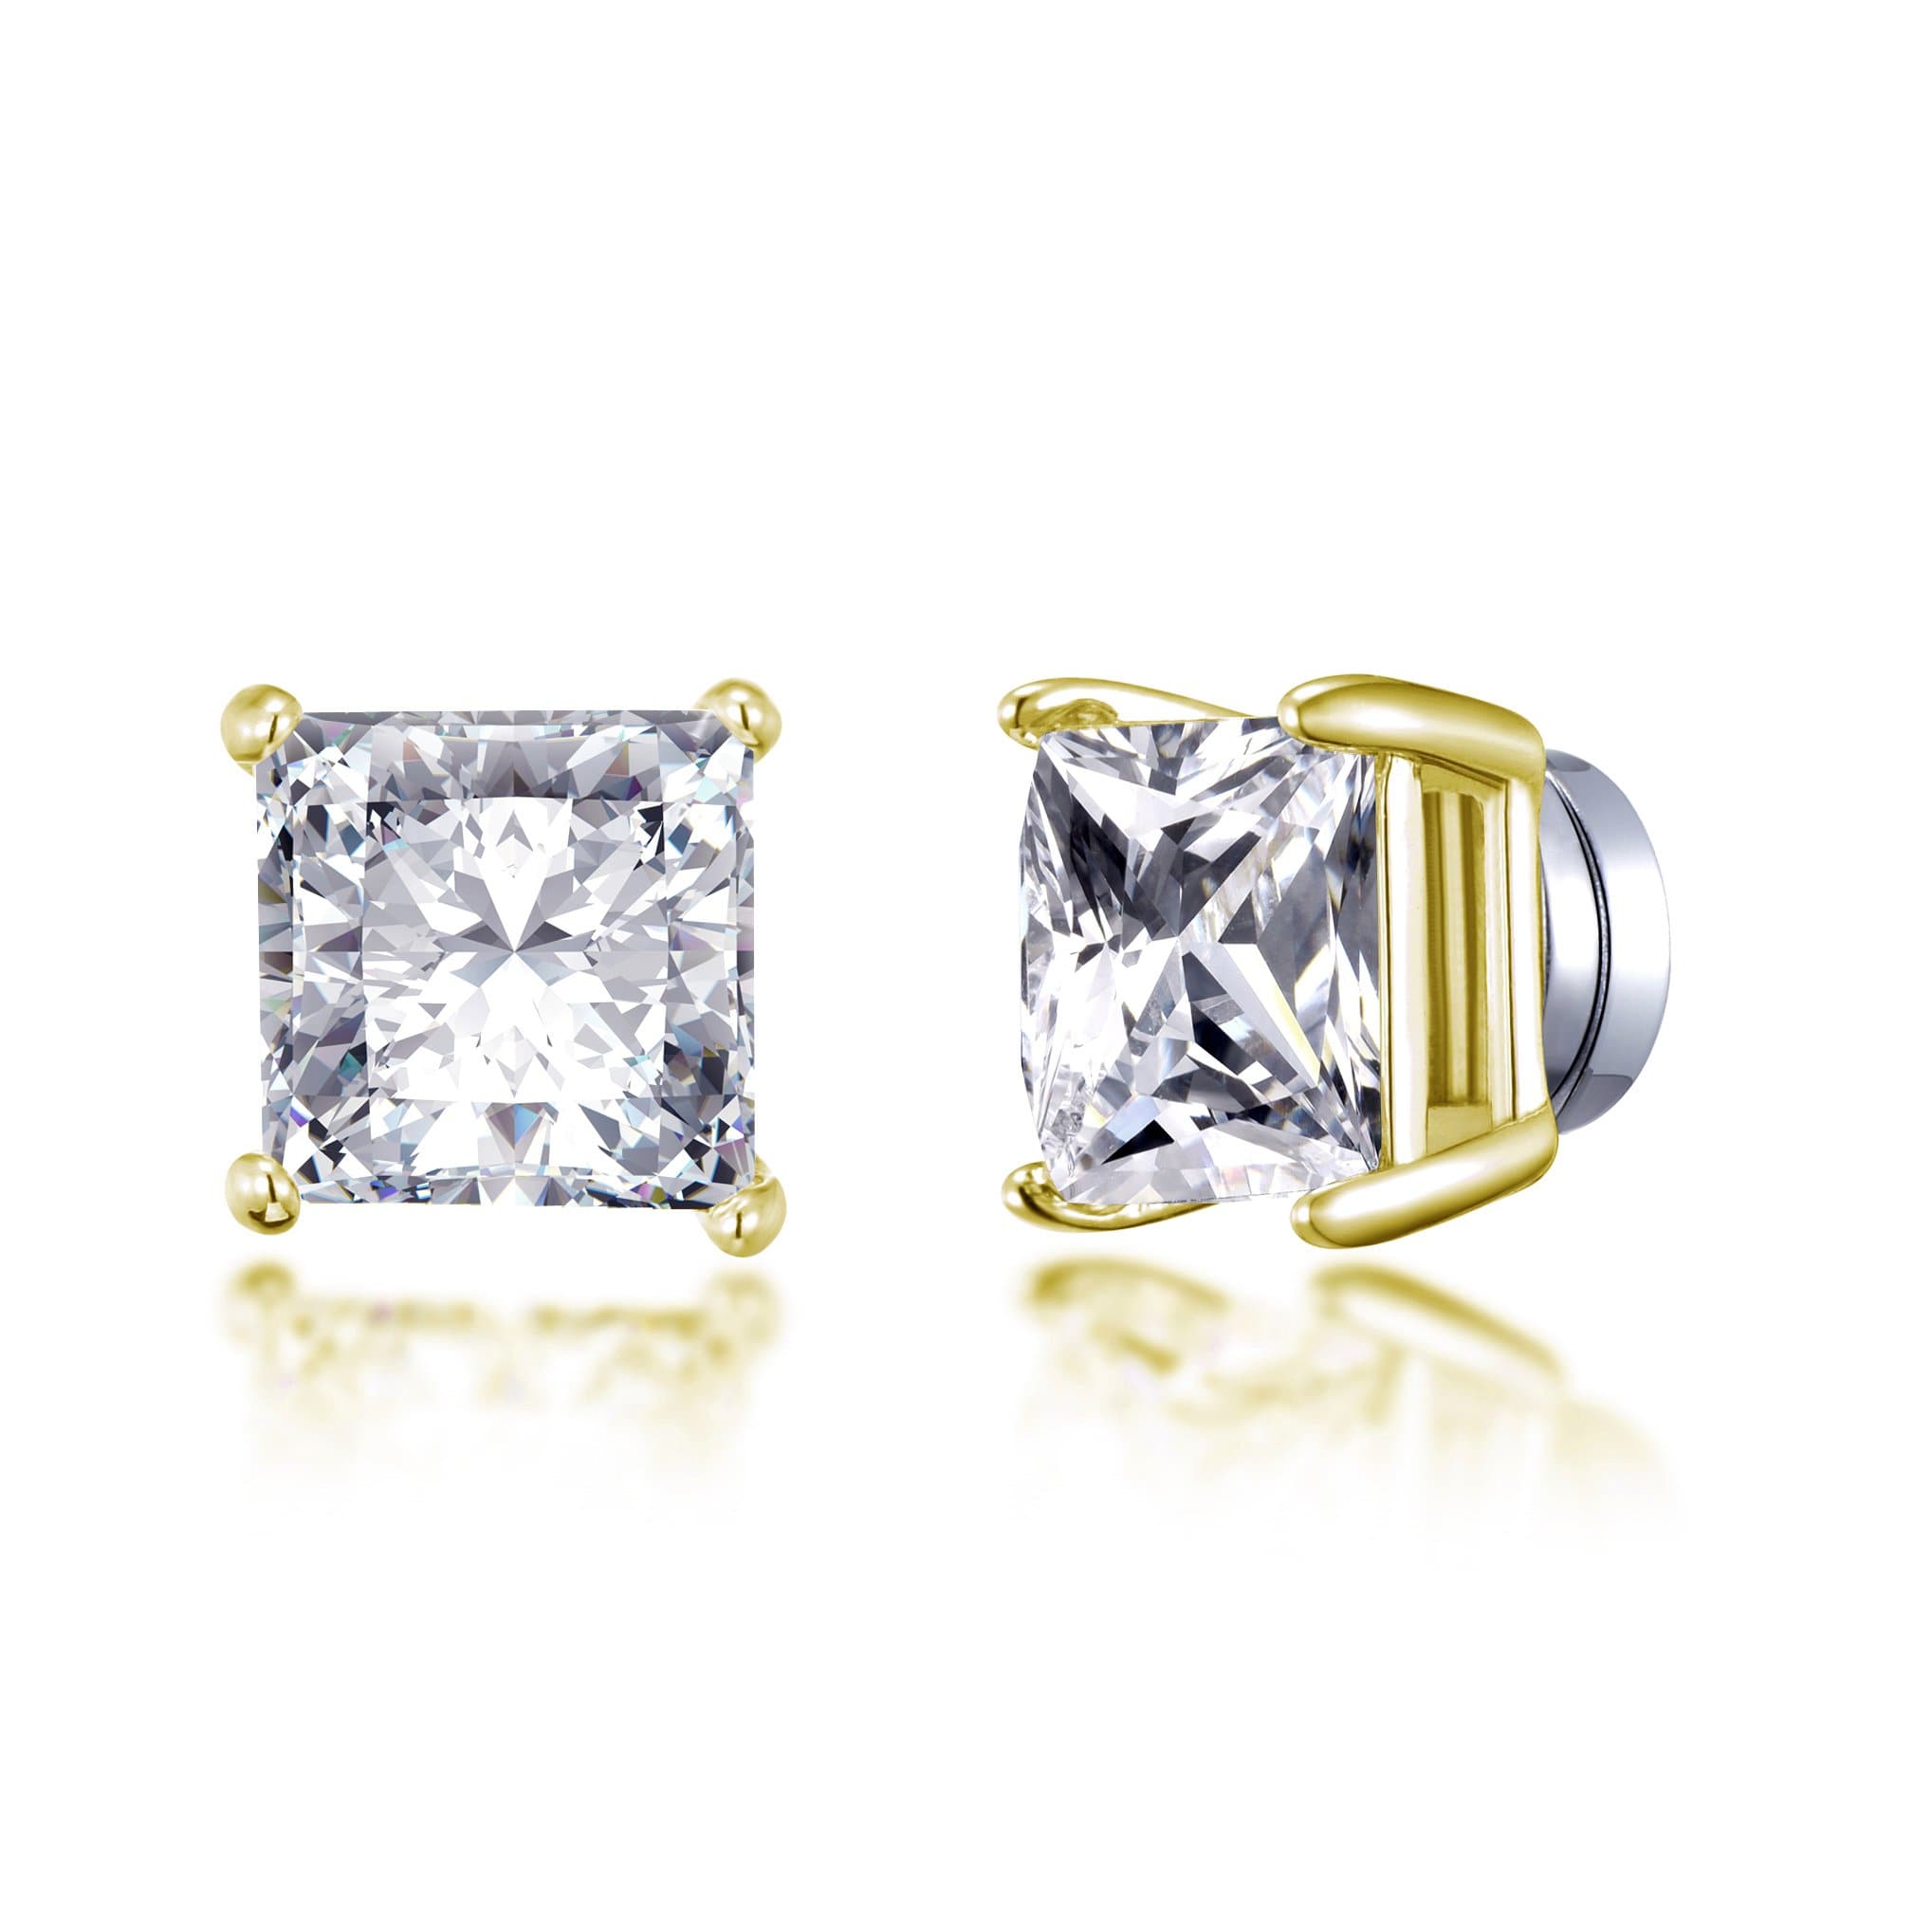 Gold Plated Square Magnetic Clip On Stud Earrings Created with Zircondia® Crystals by Philip Jones Jewellery